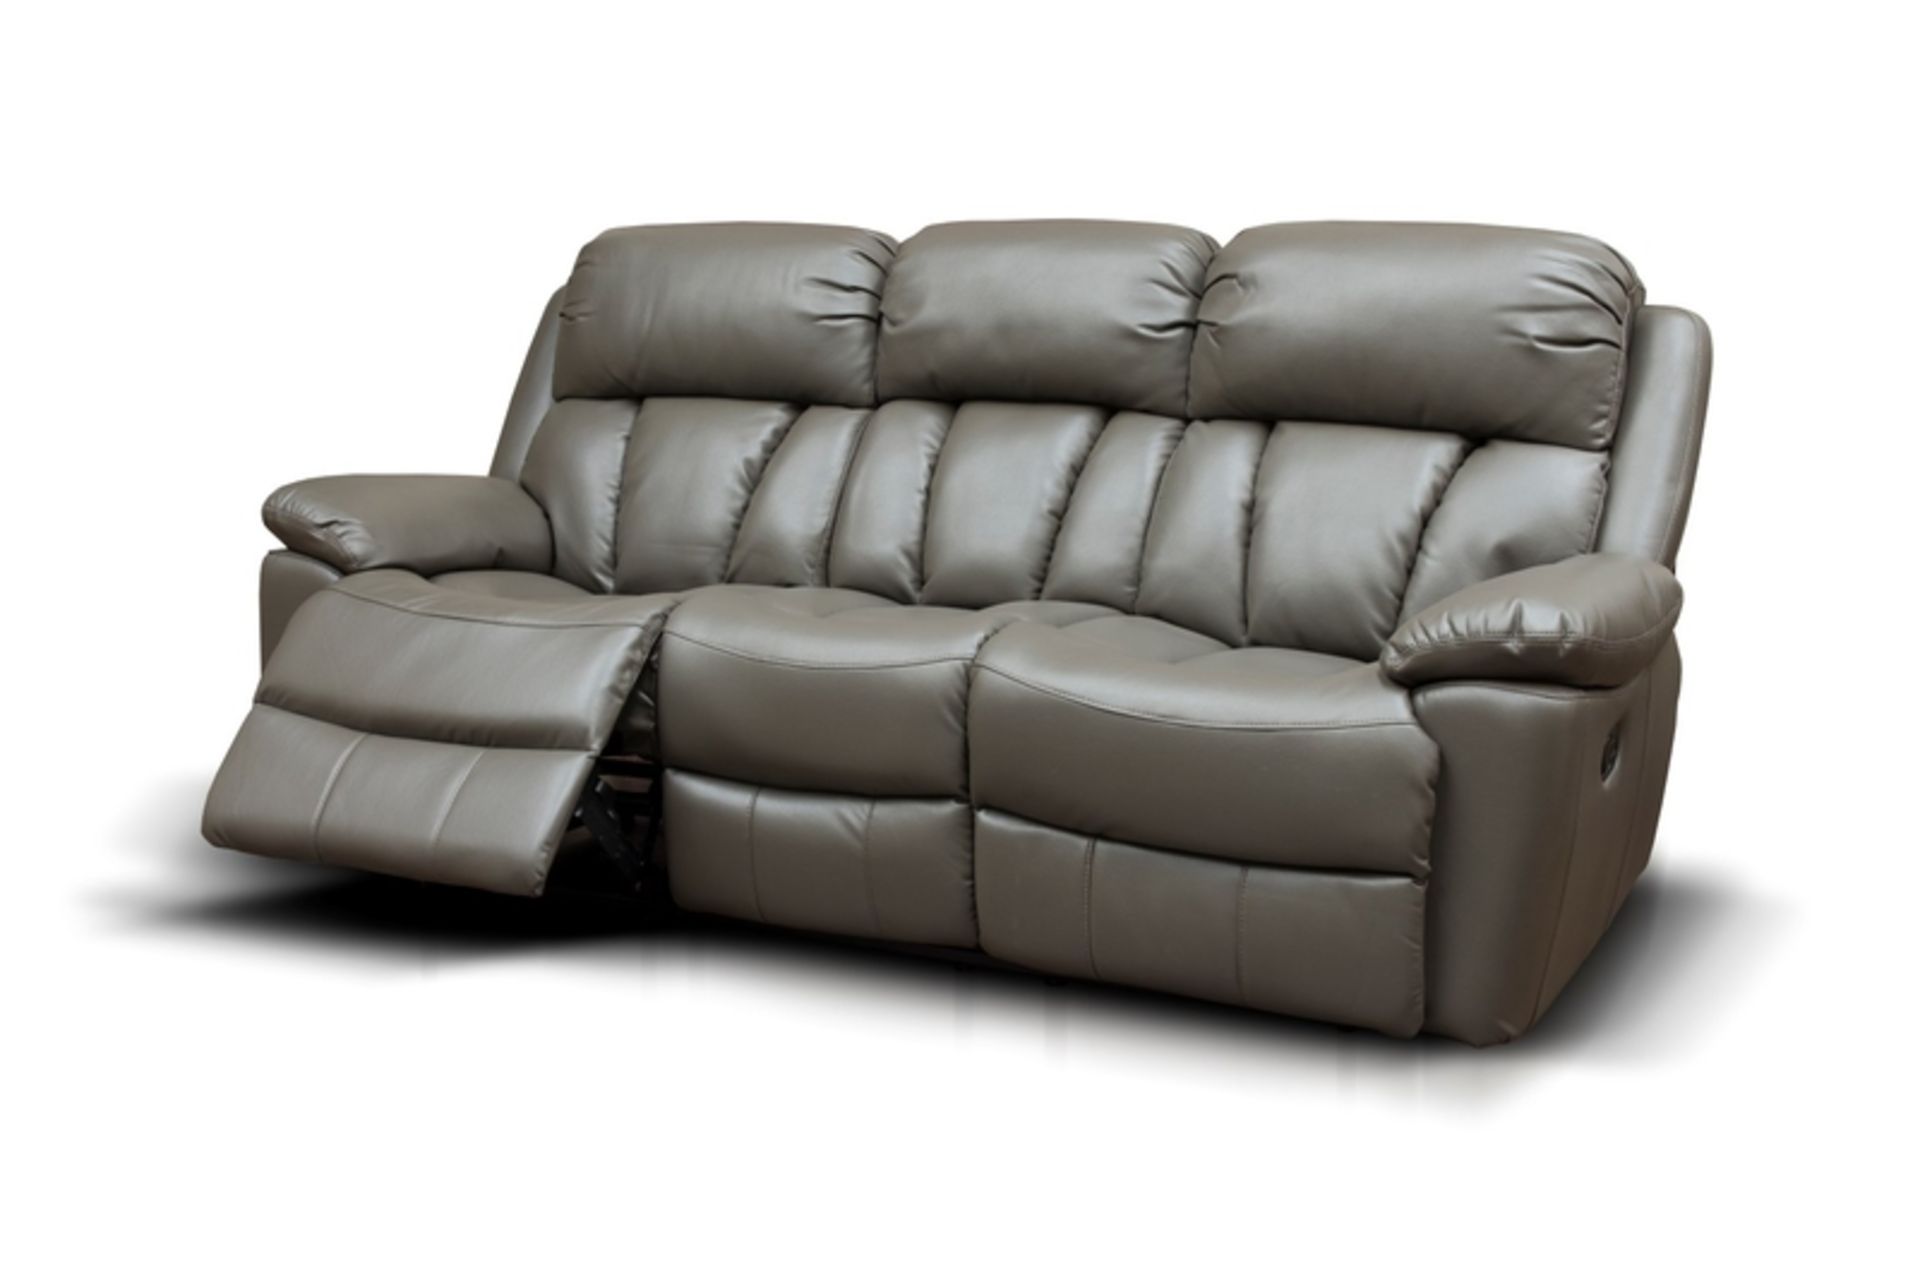 Brand New Boxed Benson 3 Seater Grey Leatheraire Reclining Sofa Plus 2 Matching Arm Chairs - Image 2 of 2